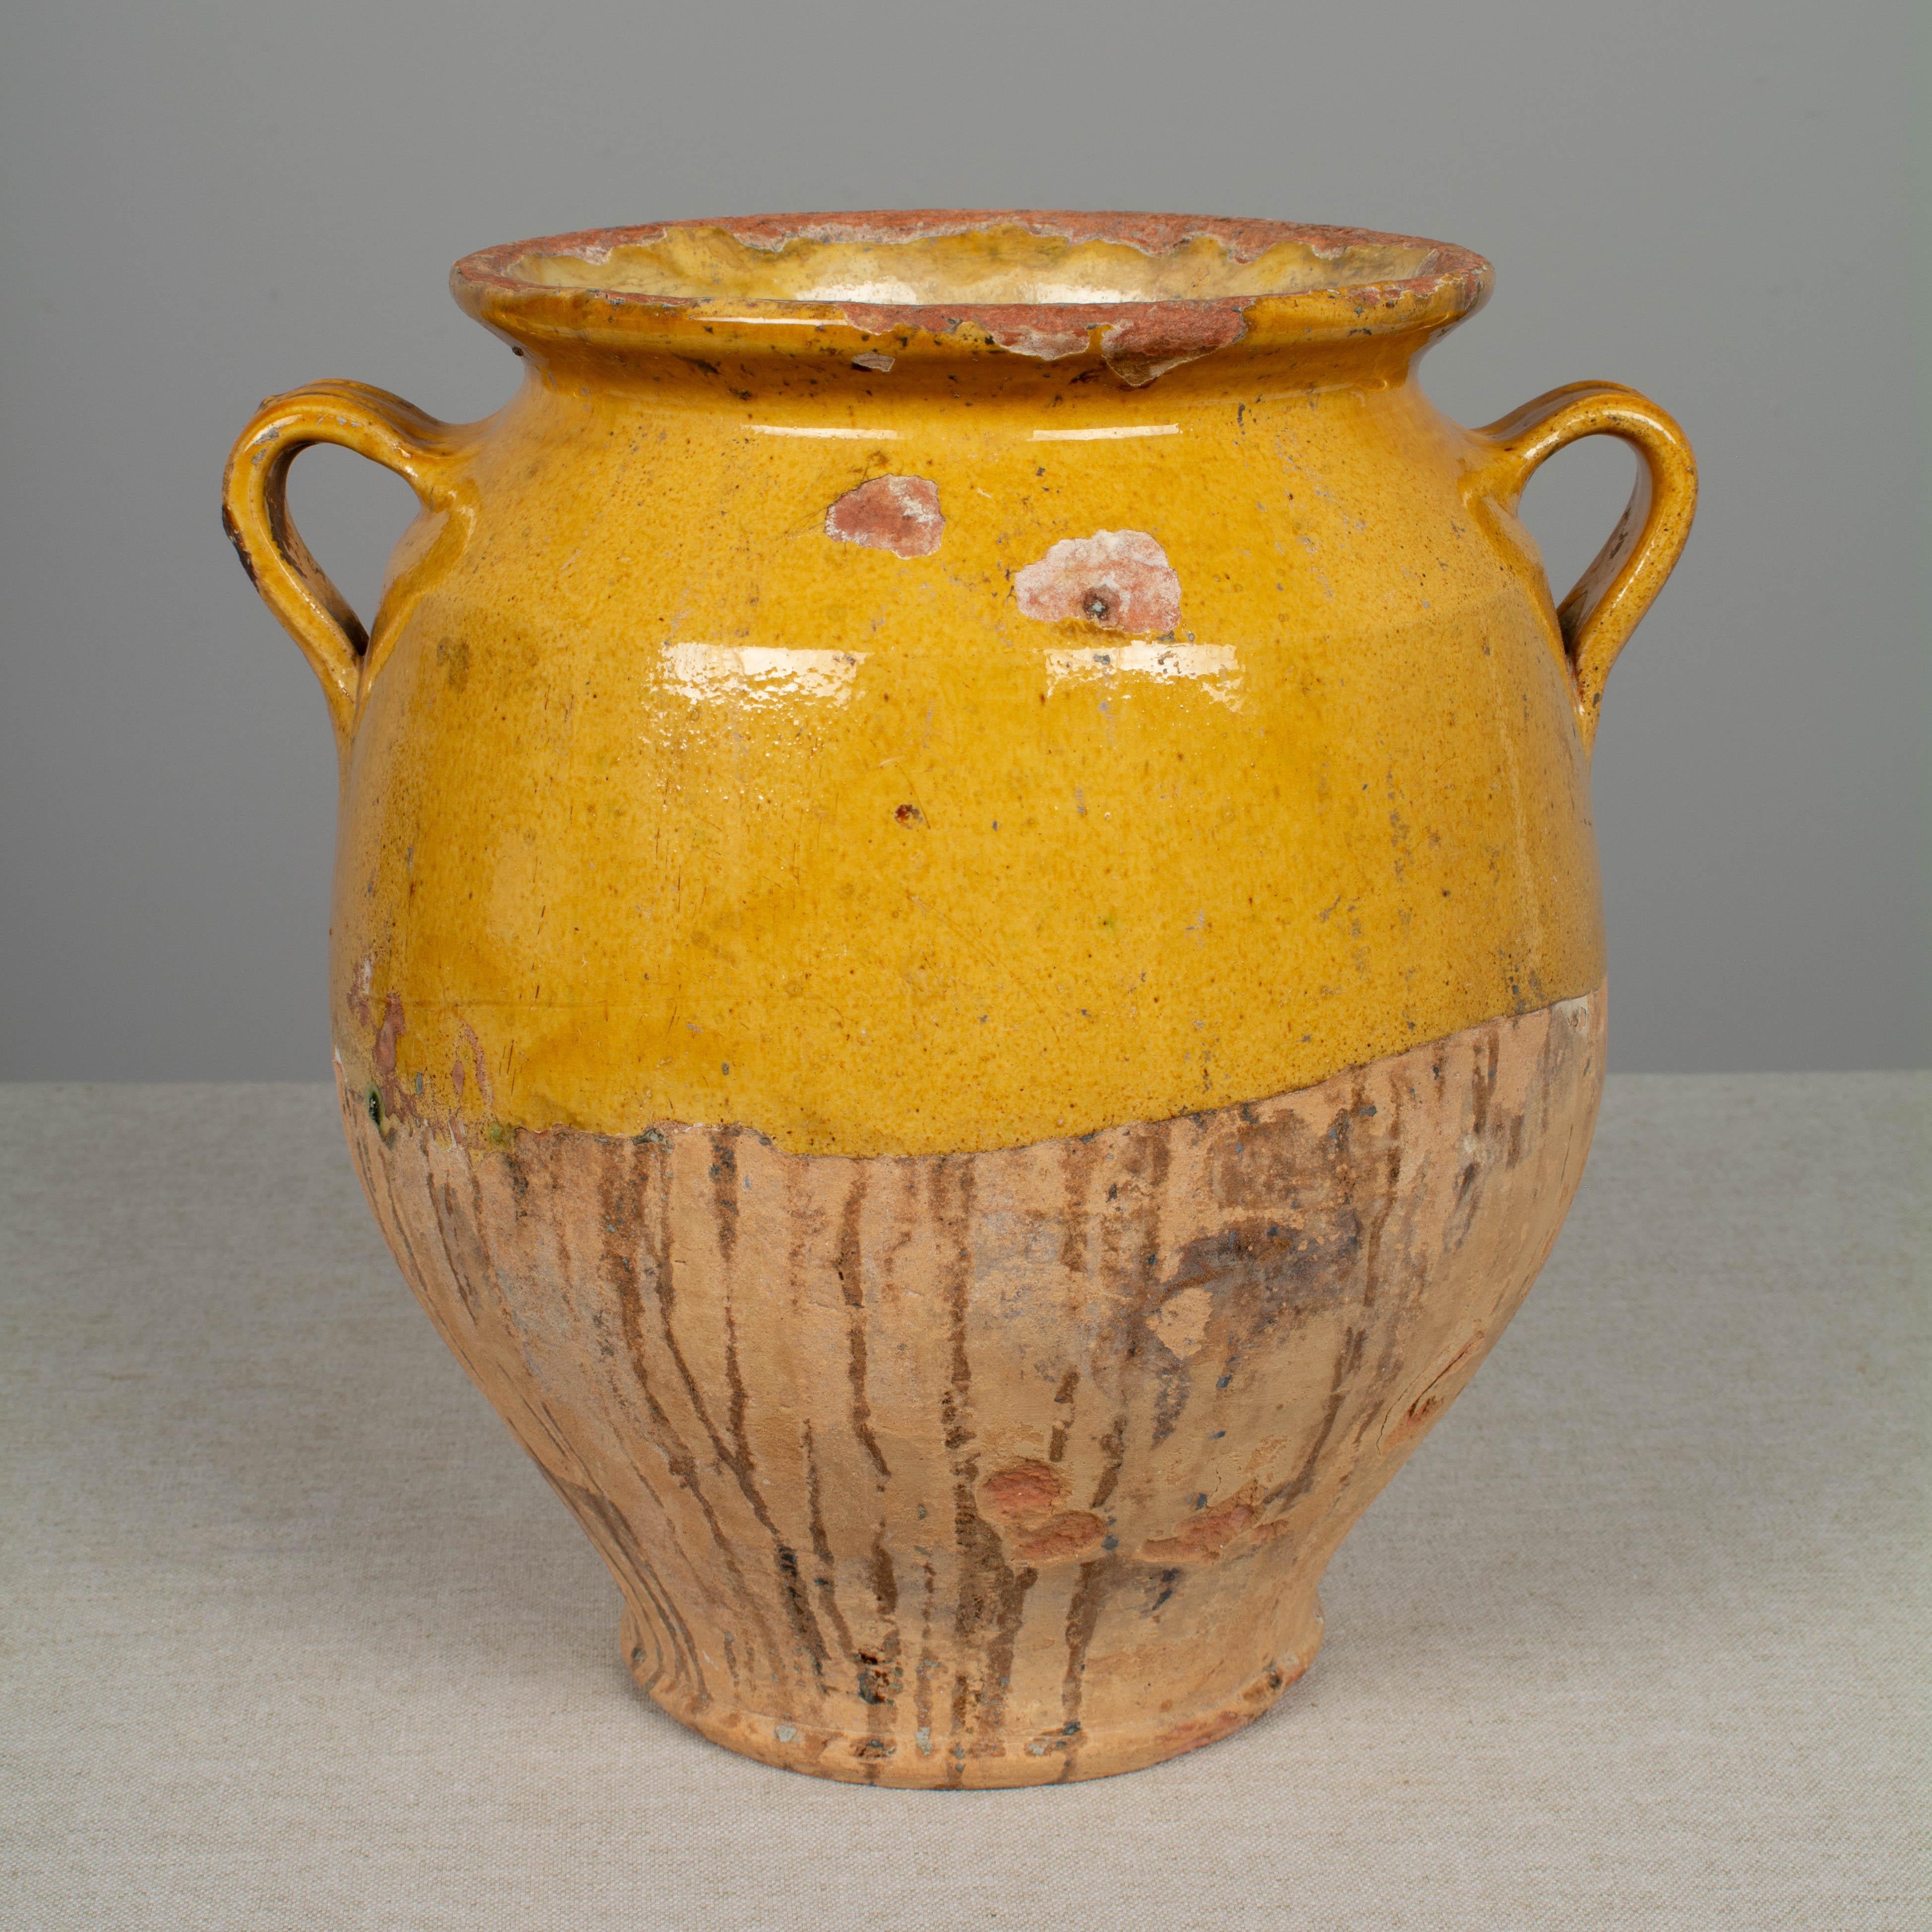 An earthenware confit pot from the Southwest of France with traditional yellow glaze. Beautiful patina and bright yellow color. Hairline cracks and losses to glaze. Weight: 5.8 lbs. These ordinary earthenware vessels were once used daily in the